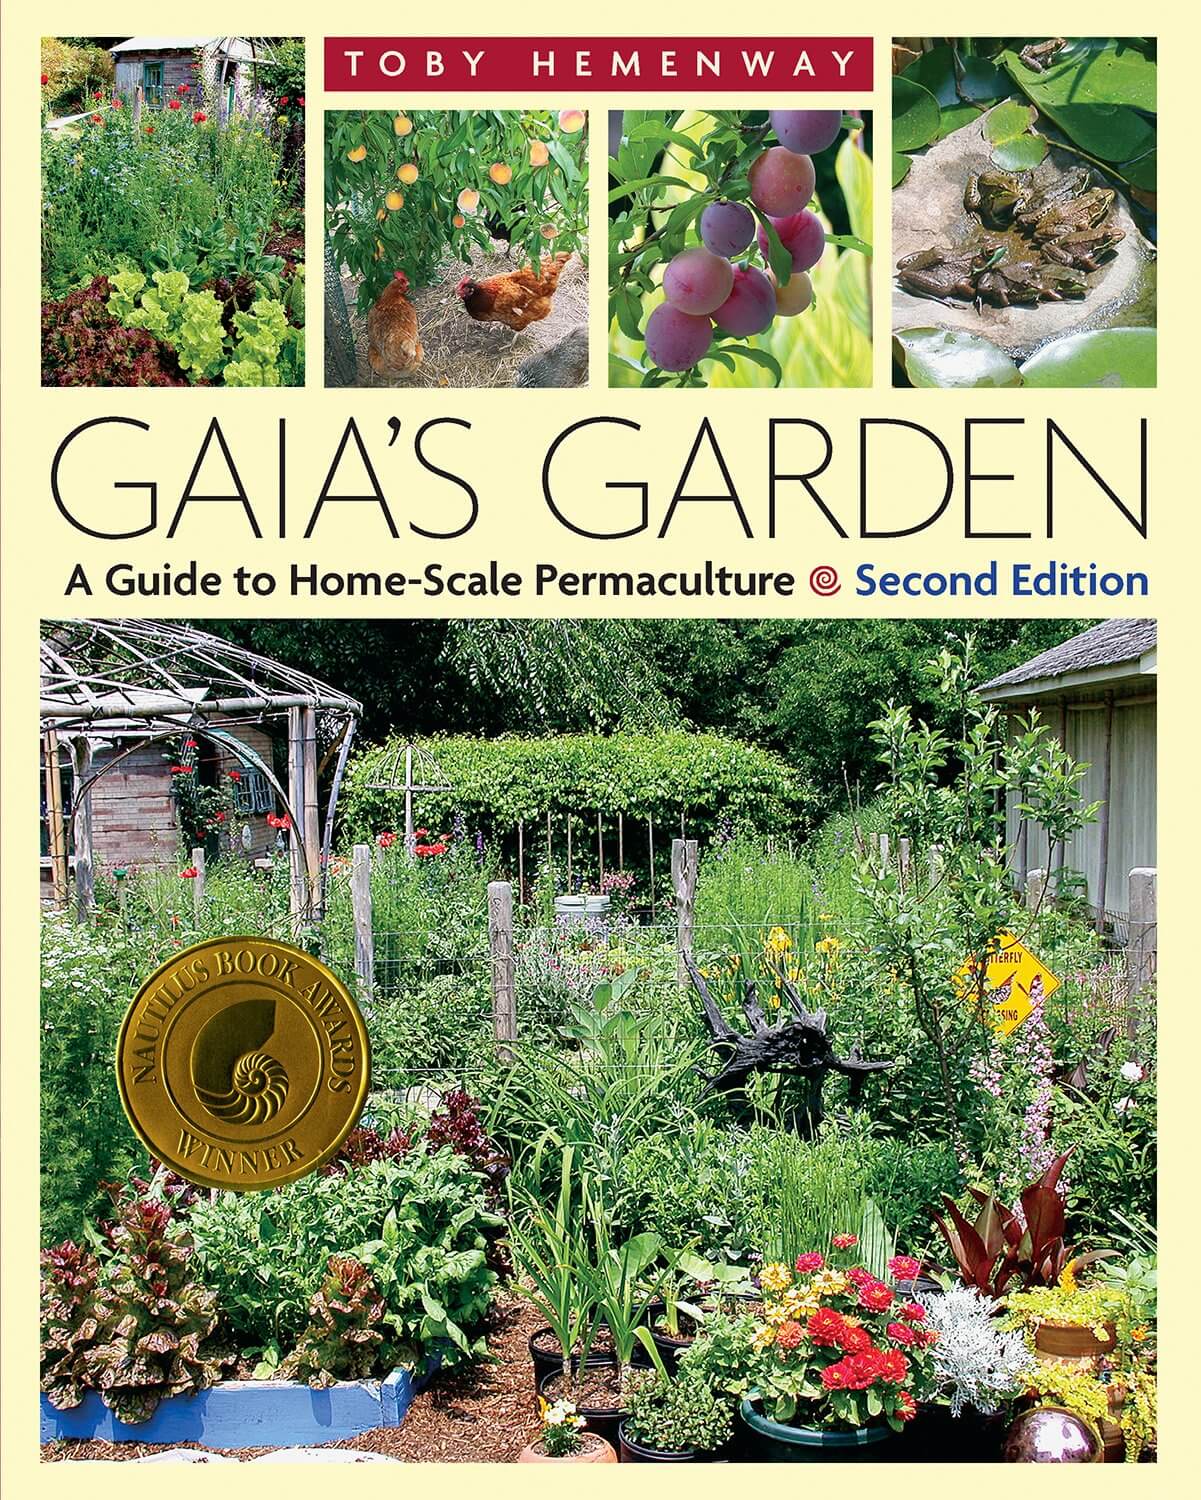 The bookcover of Gaia's Garden by Toby Hemenway.